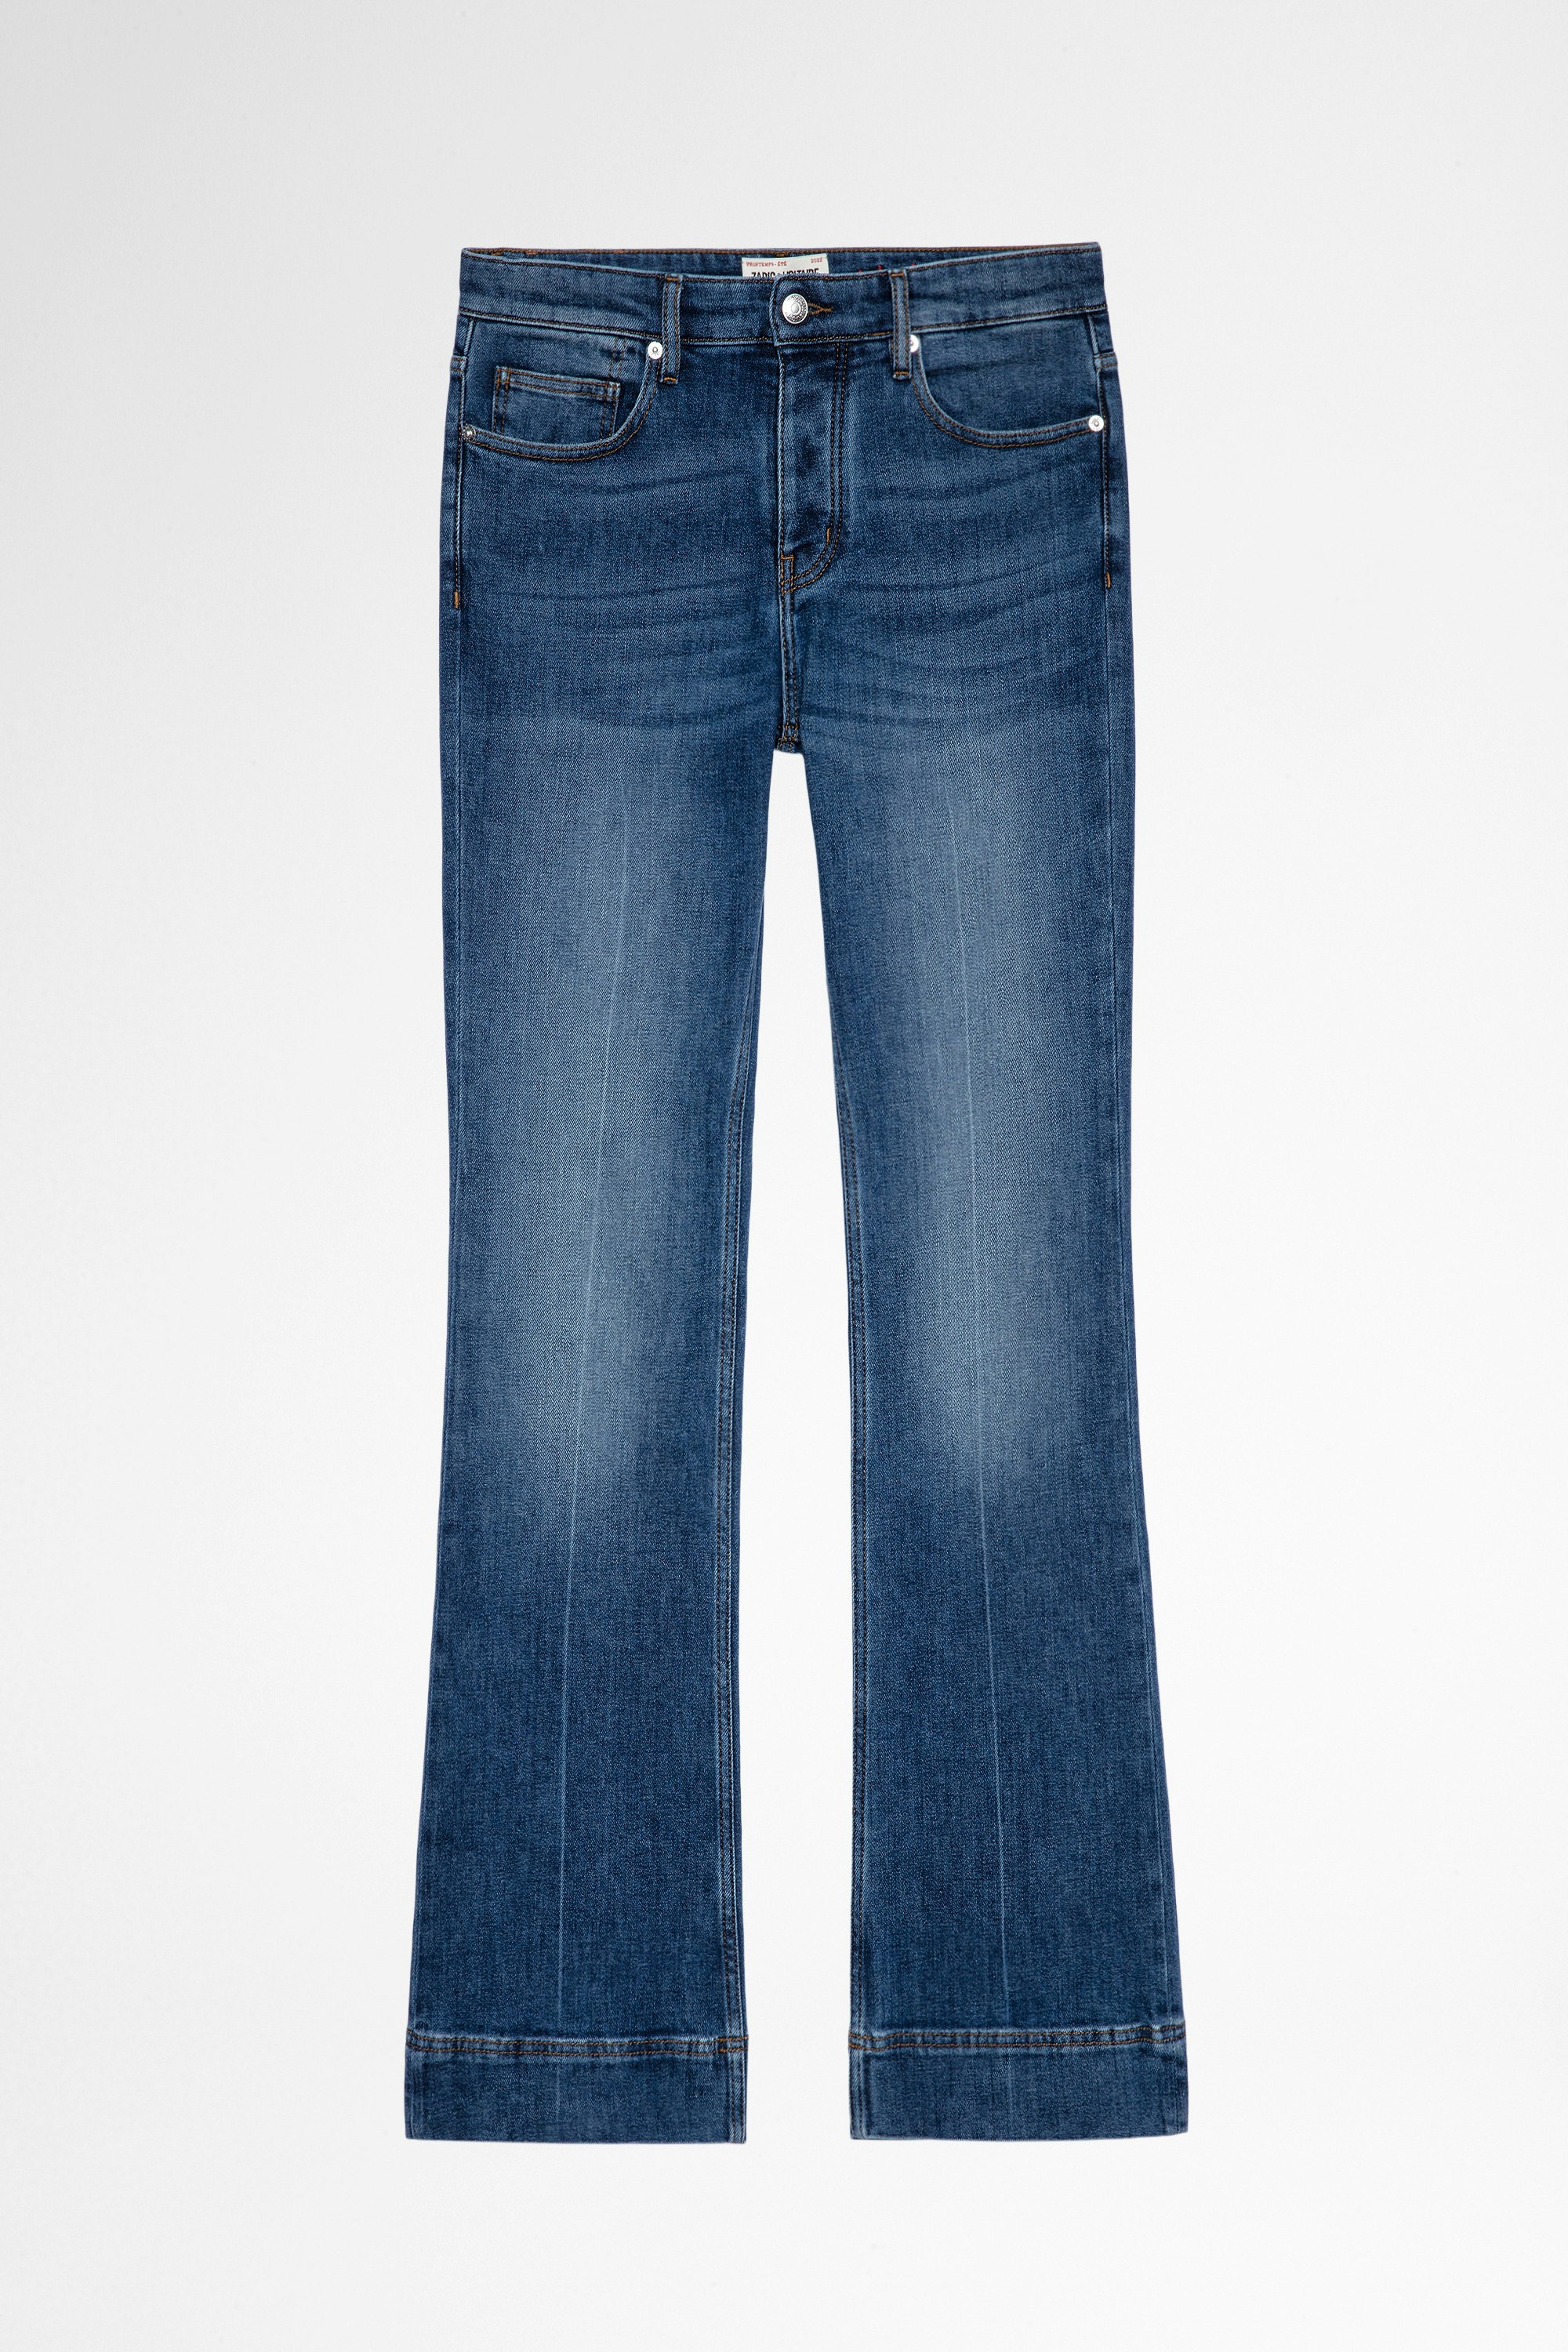 Vincente Jeans Women's faded blue denim flare-leg jeans. Made with recycled fibers